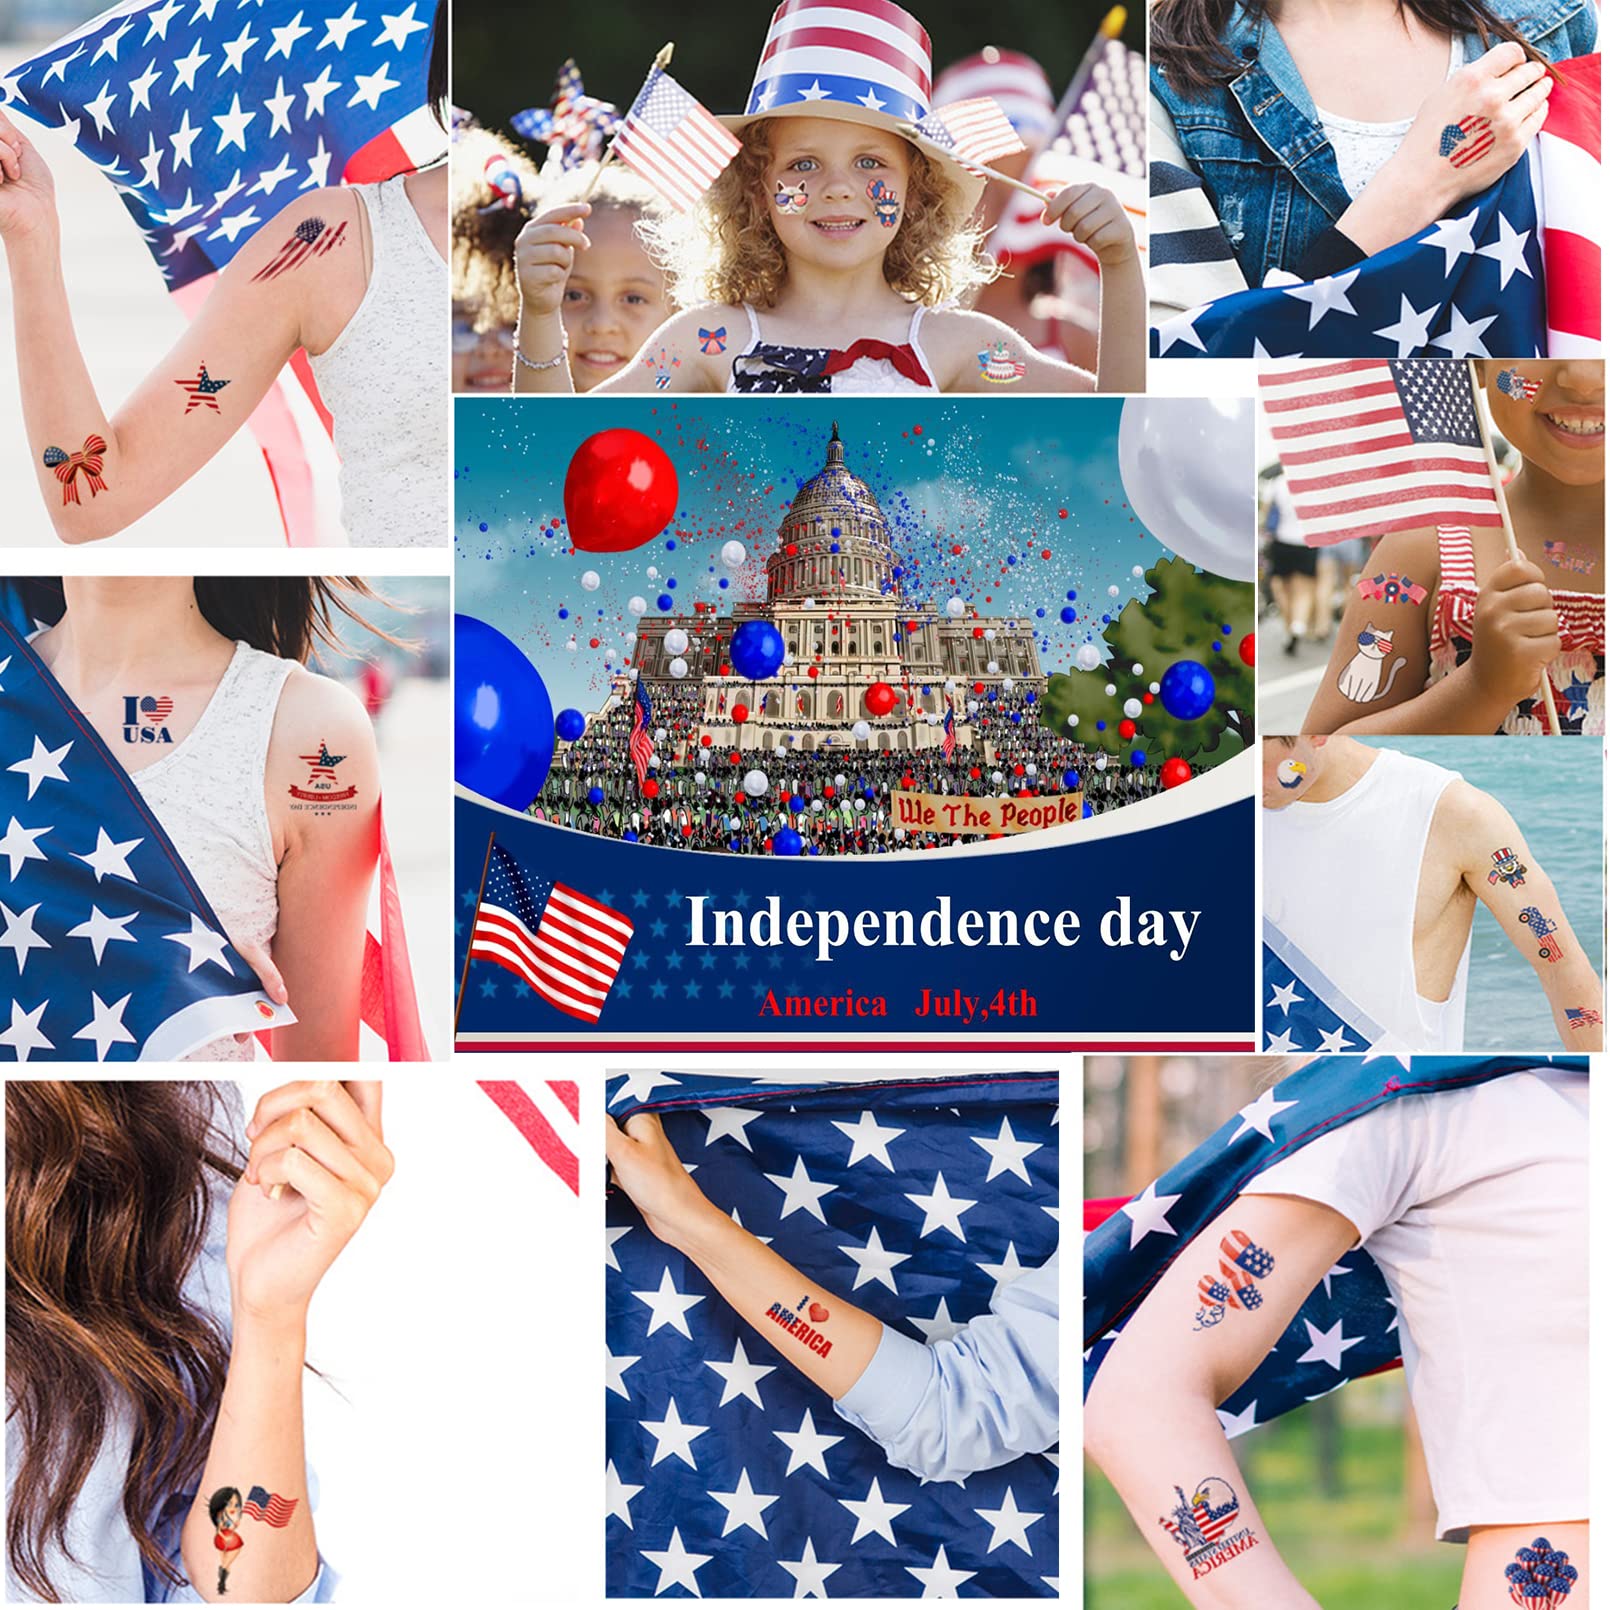 Aresvns Independence Day Temporary Tattoo 32 Sheets,USA Flag Sleeve Tattoo,Red White and Blue Party Supplies, 4th of July, Memorial Day, Labor Day Decorations Patriotic Tattoos